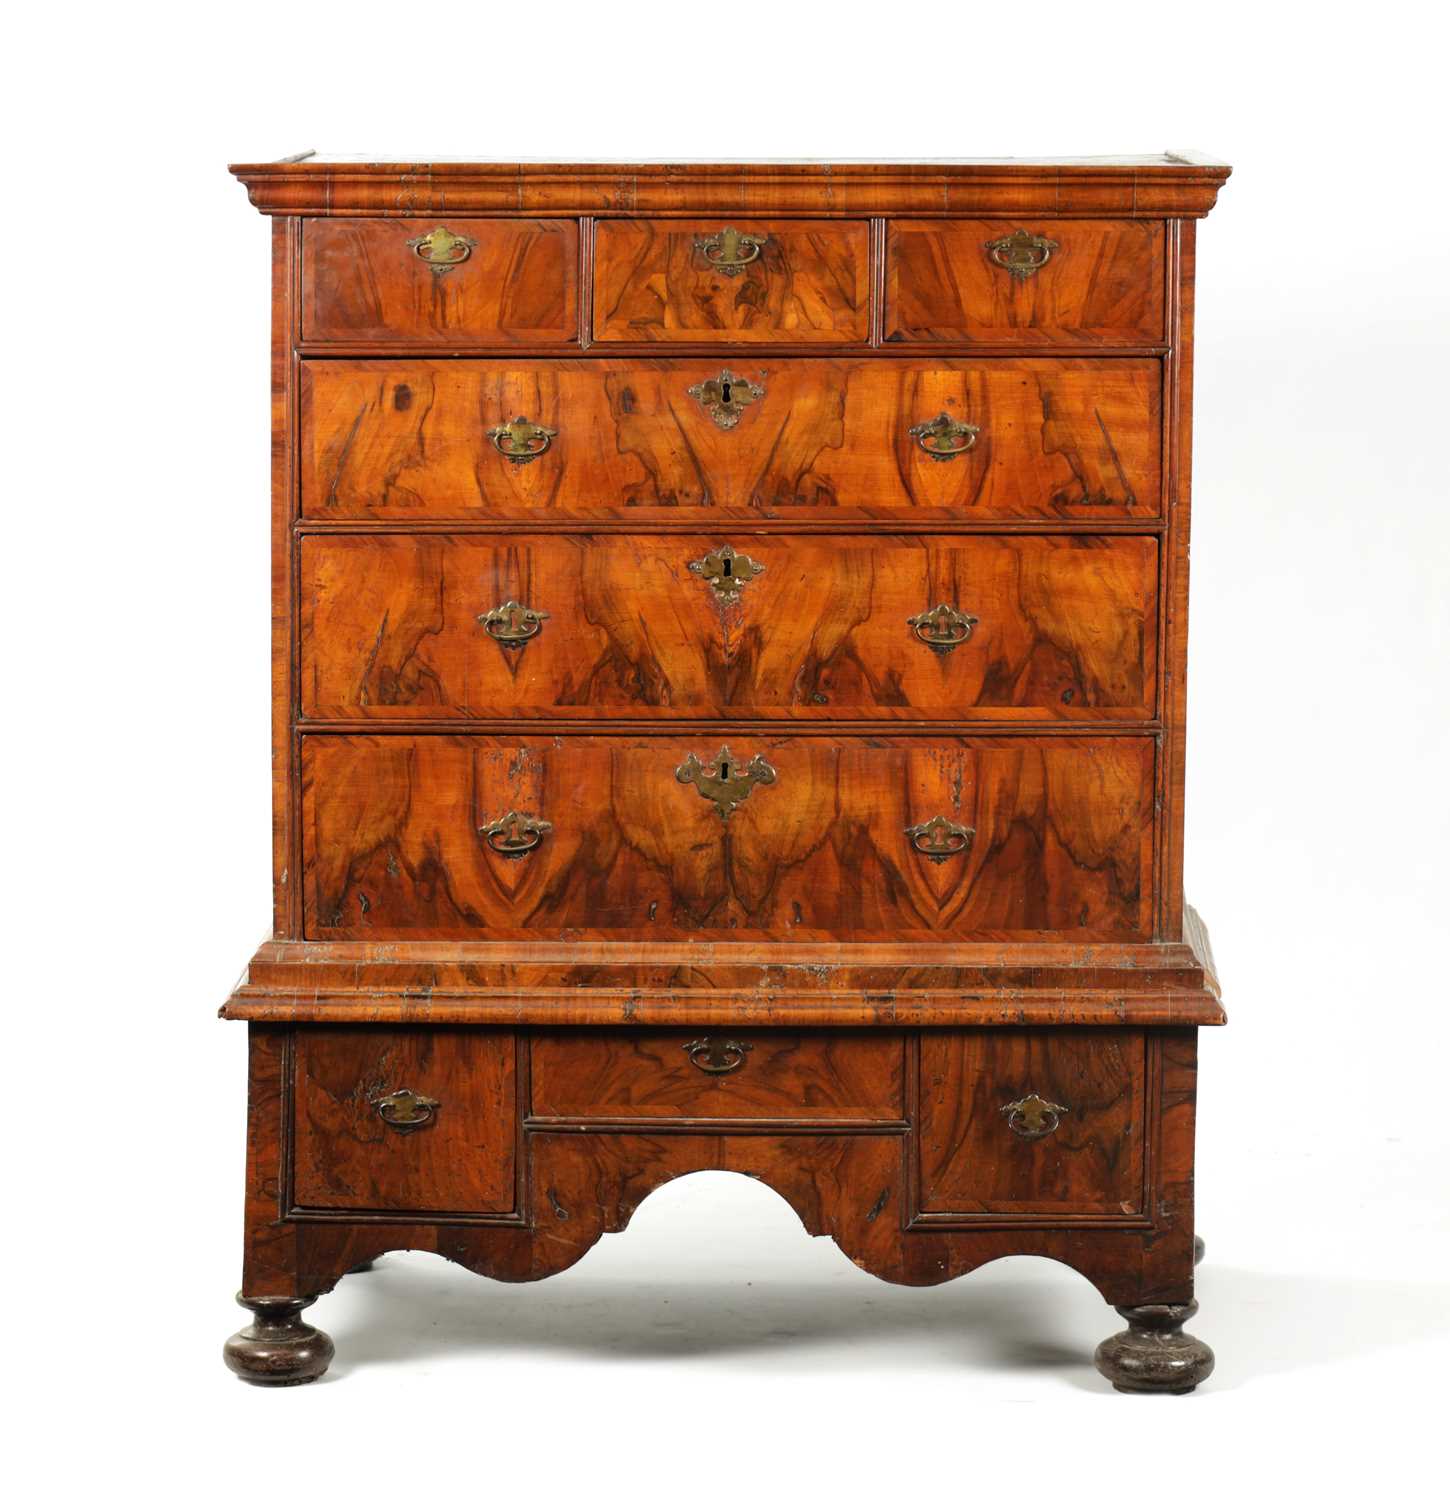 AN EARLY 18TH CENTURY WALNUT CHEST ON STAND